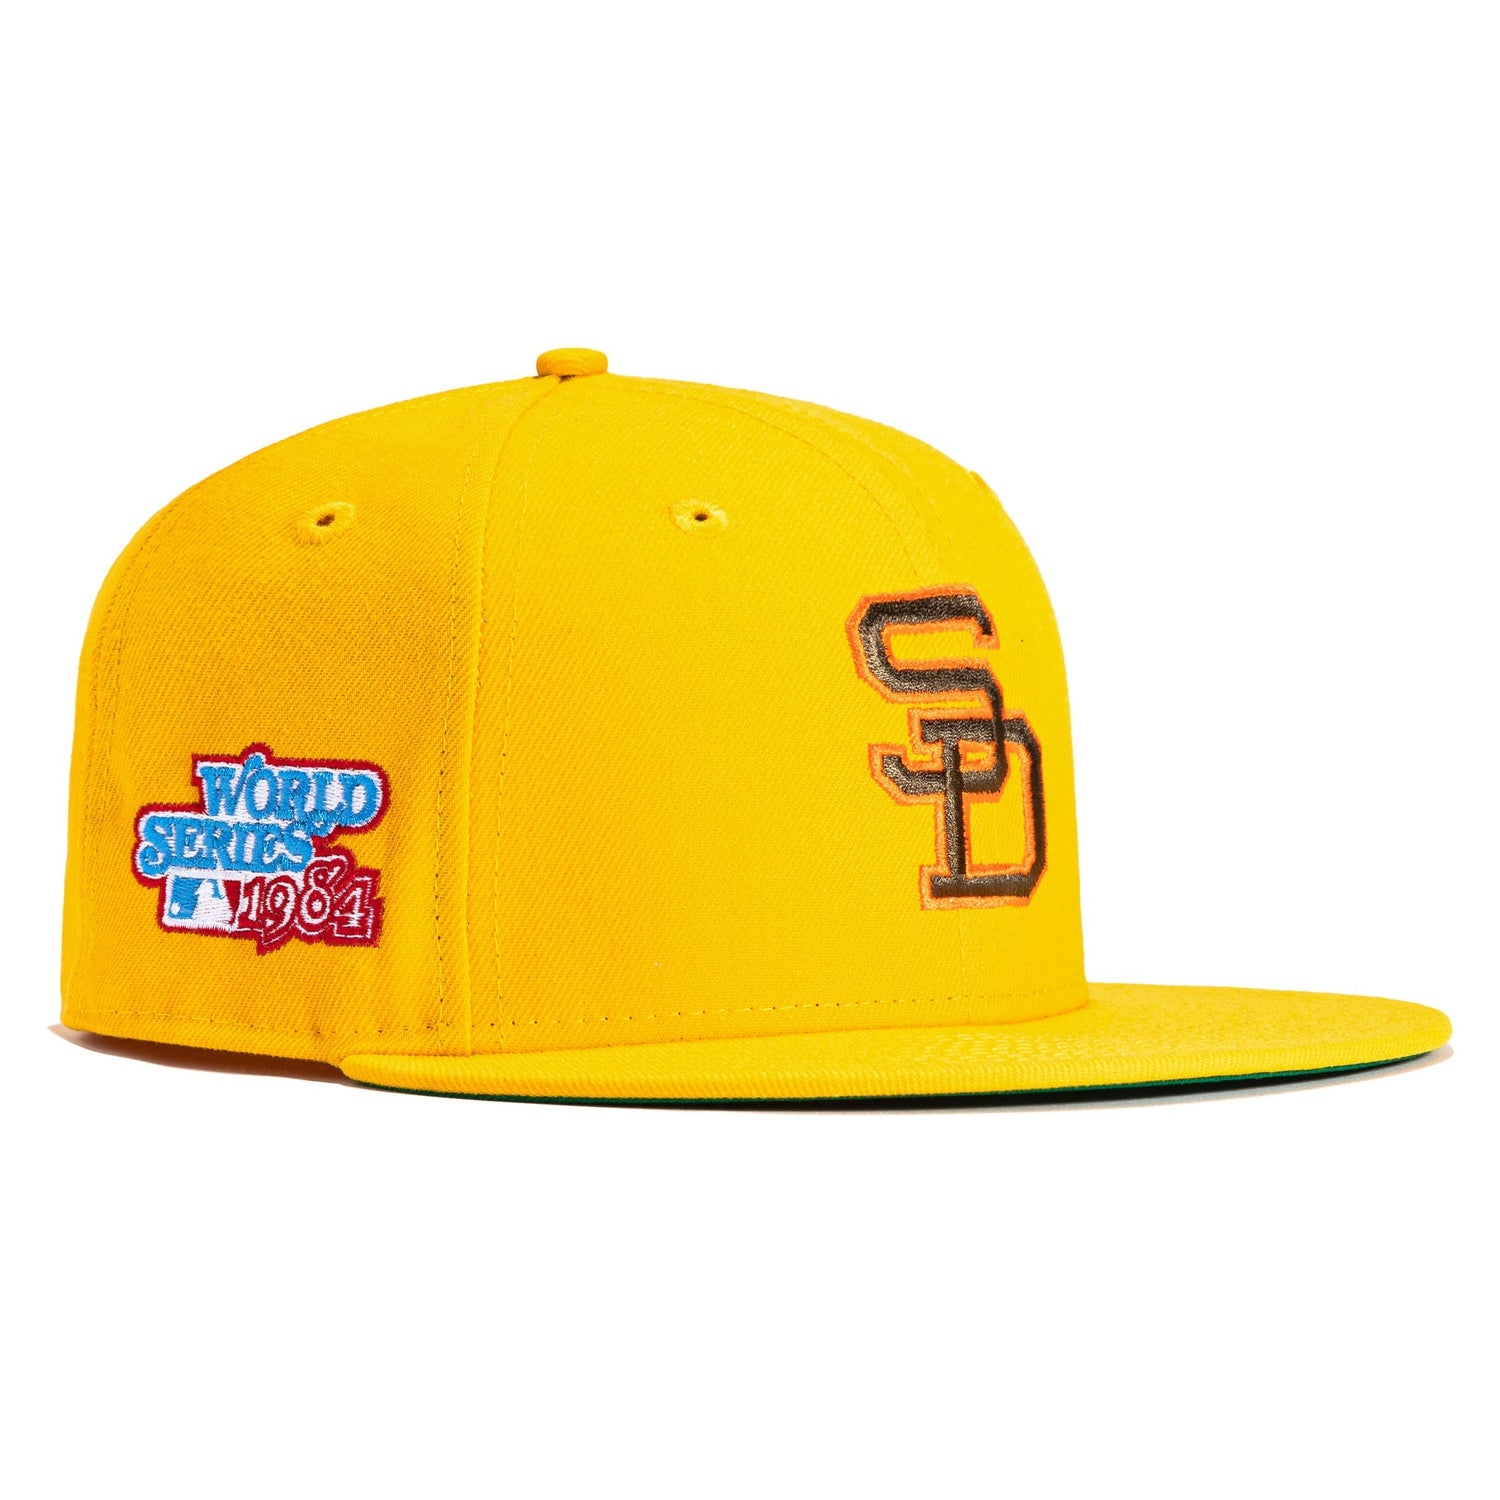 San Diego Padres New Era MLB 59FIFTY 5950 Fitted Cap Hat Brown Crown/Visor Yellow/Orange Cooperstown Logo 1984 World Series Side Patch Green UV 7 1/2